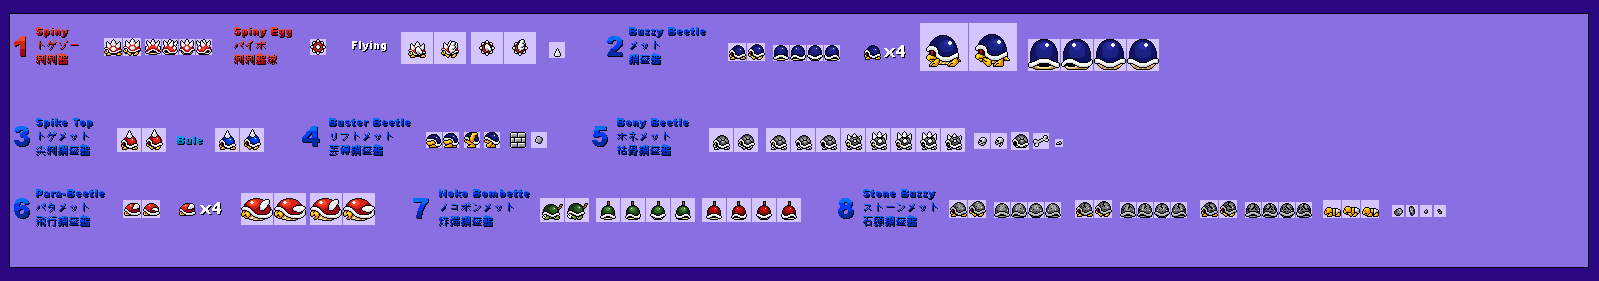 Buzzy Beetle & Spiny (SNES-Style)